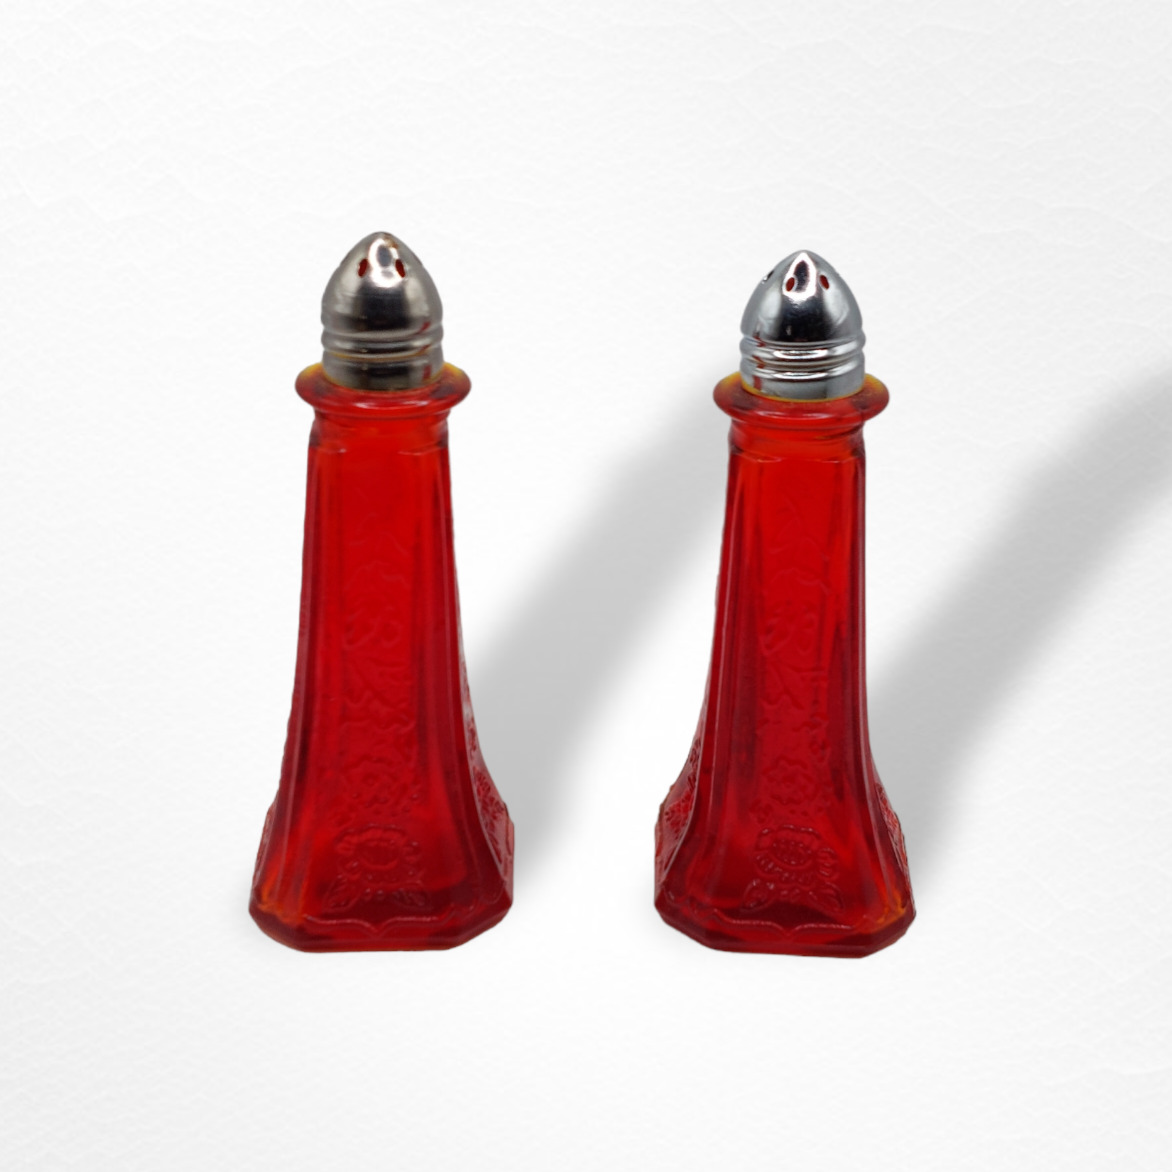 RED AMBERINA DEPRESSION STYLE GLASS SALT and PEPPER SHAKERS, Vintage, Art Deco